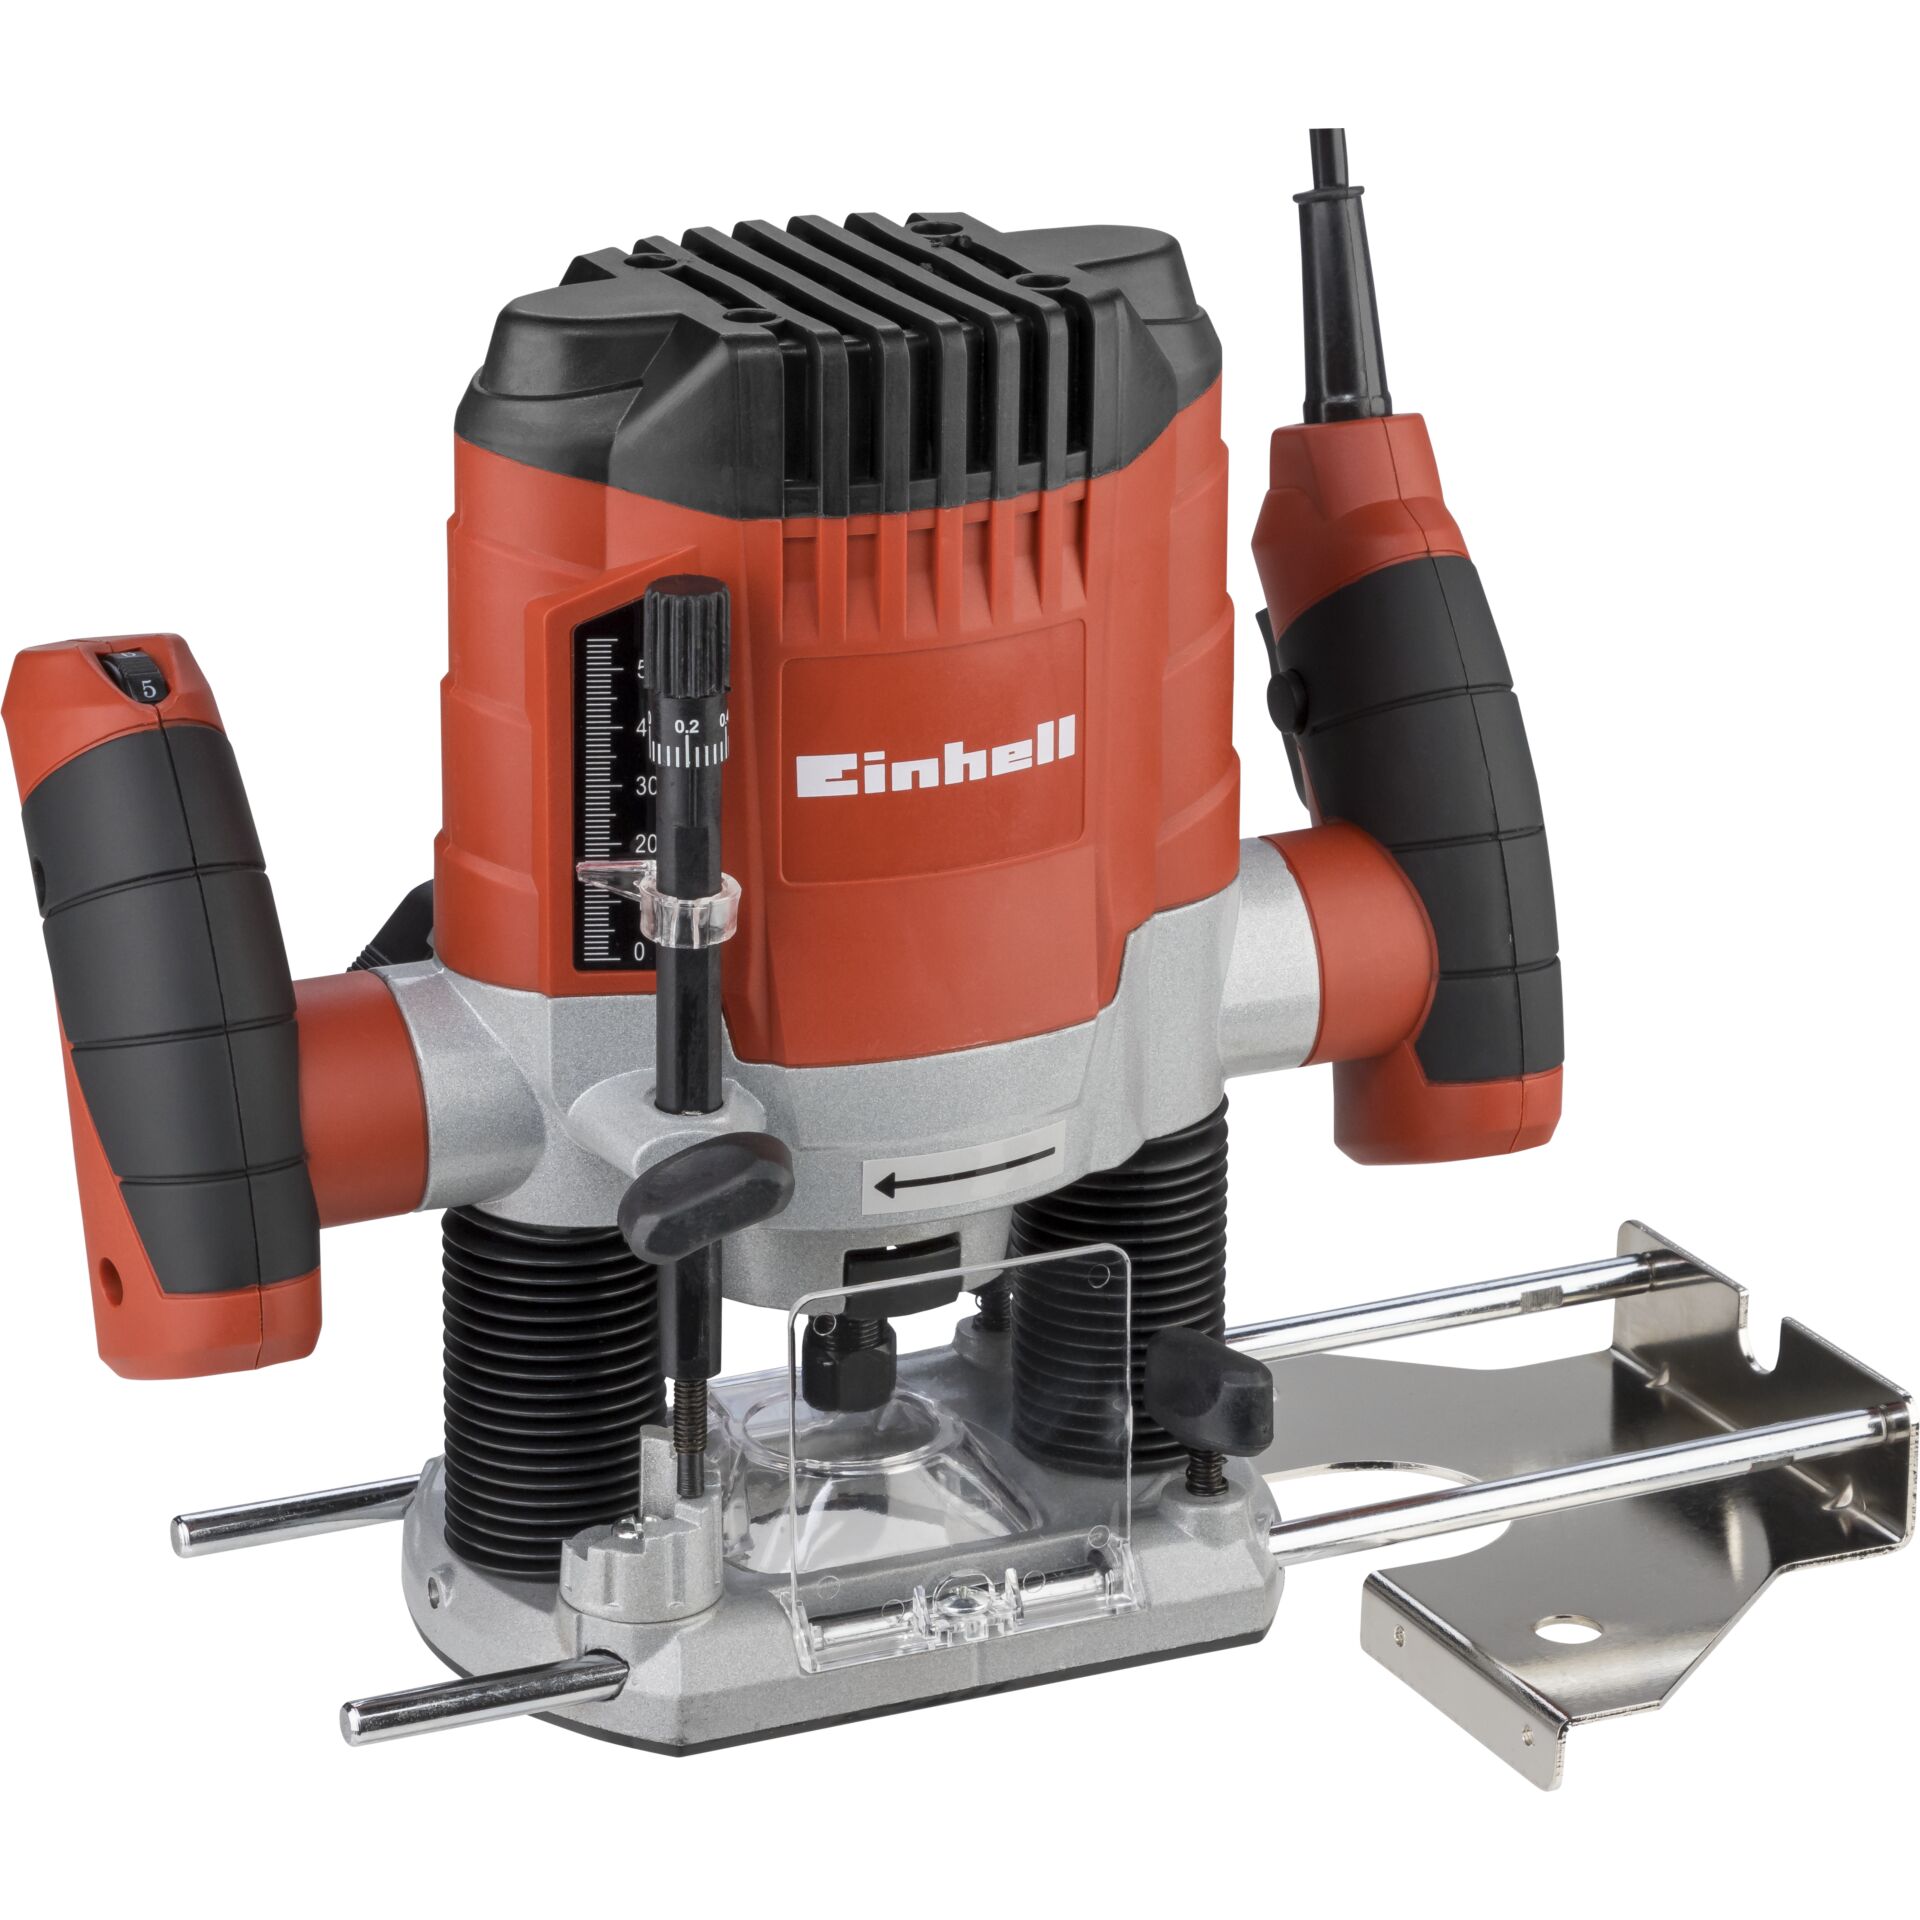 Einhell TC-RO 1155 E power router 1100 W 11000 - 30000 RPM Black Red